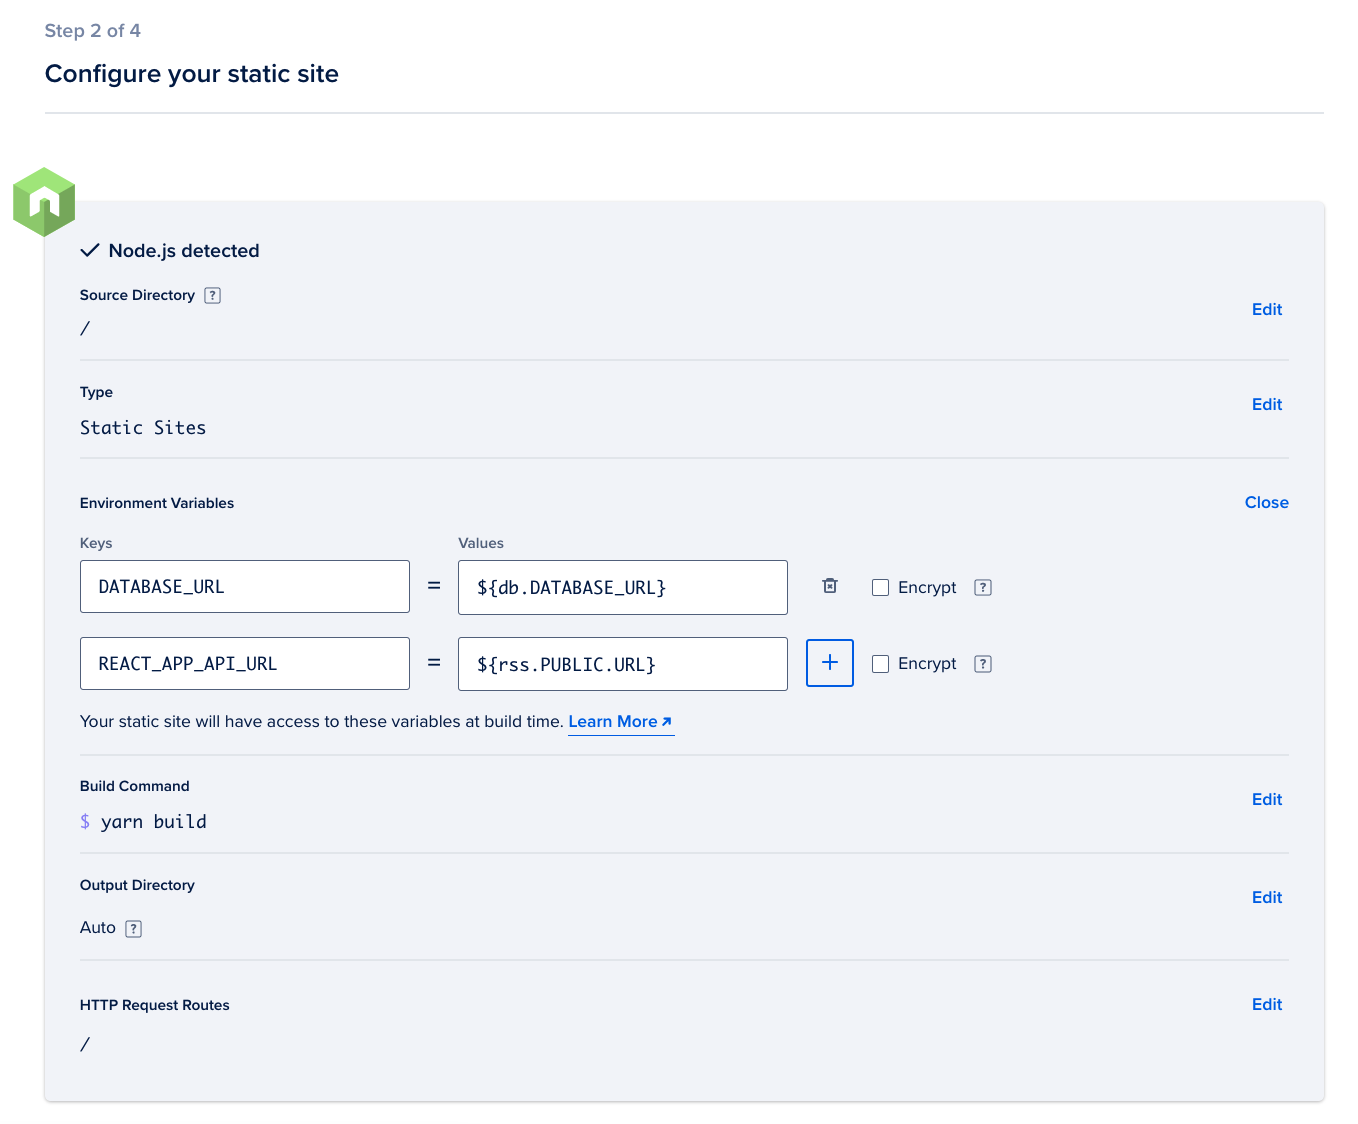 The Configure your static site page with the applicable fields filled out